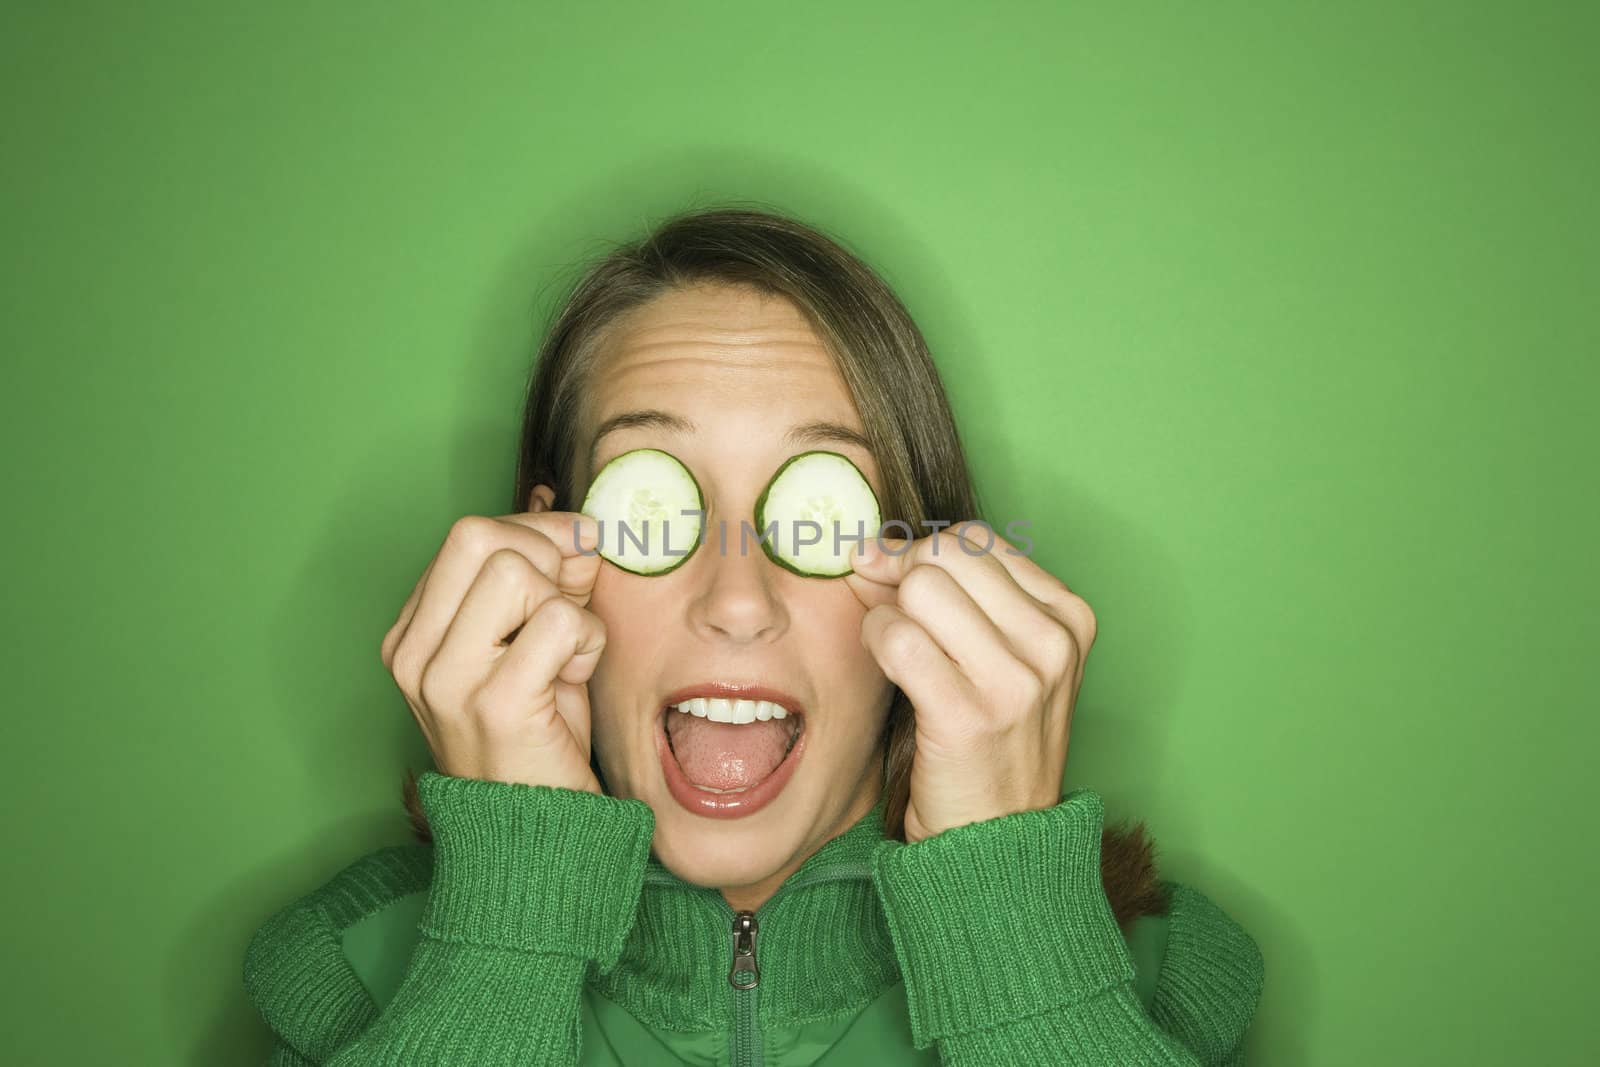 Portrait of young adult Caucasian woman on green background holding cucumber slices over her eyes.